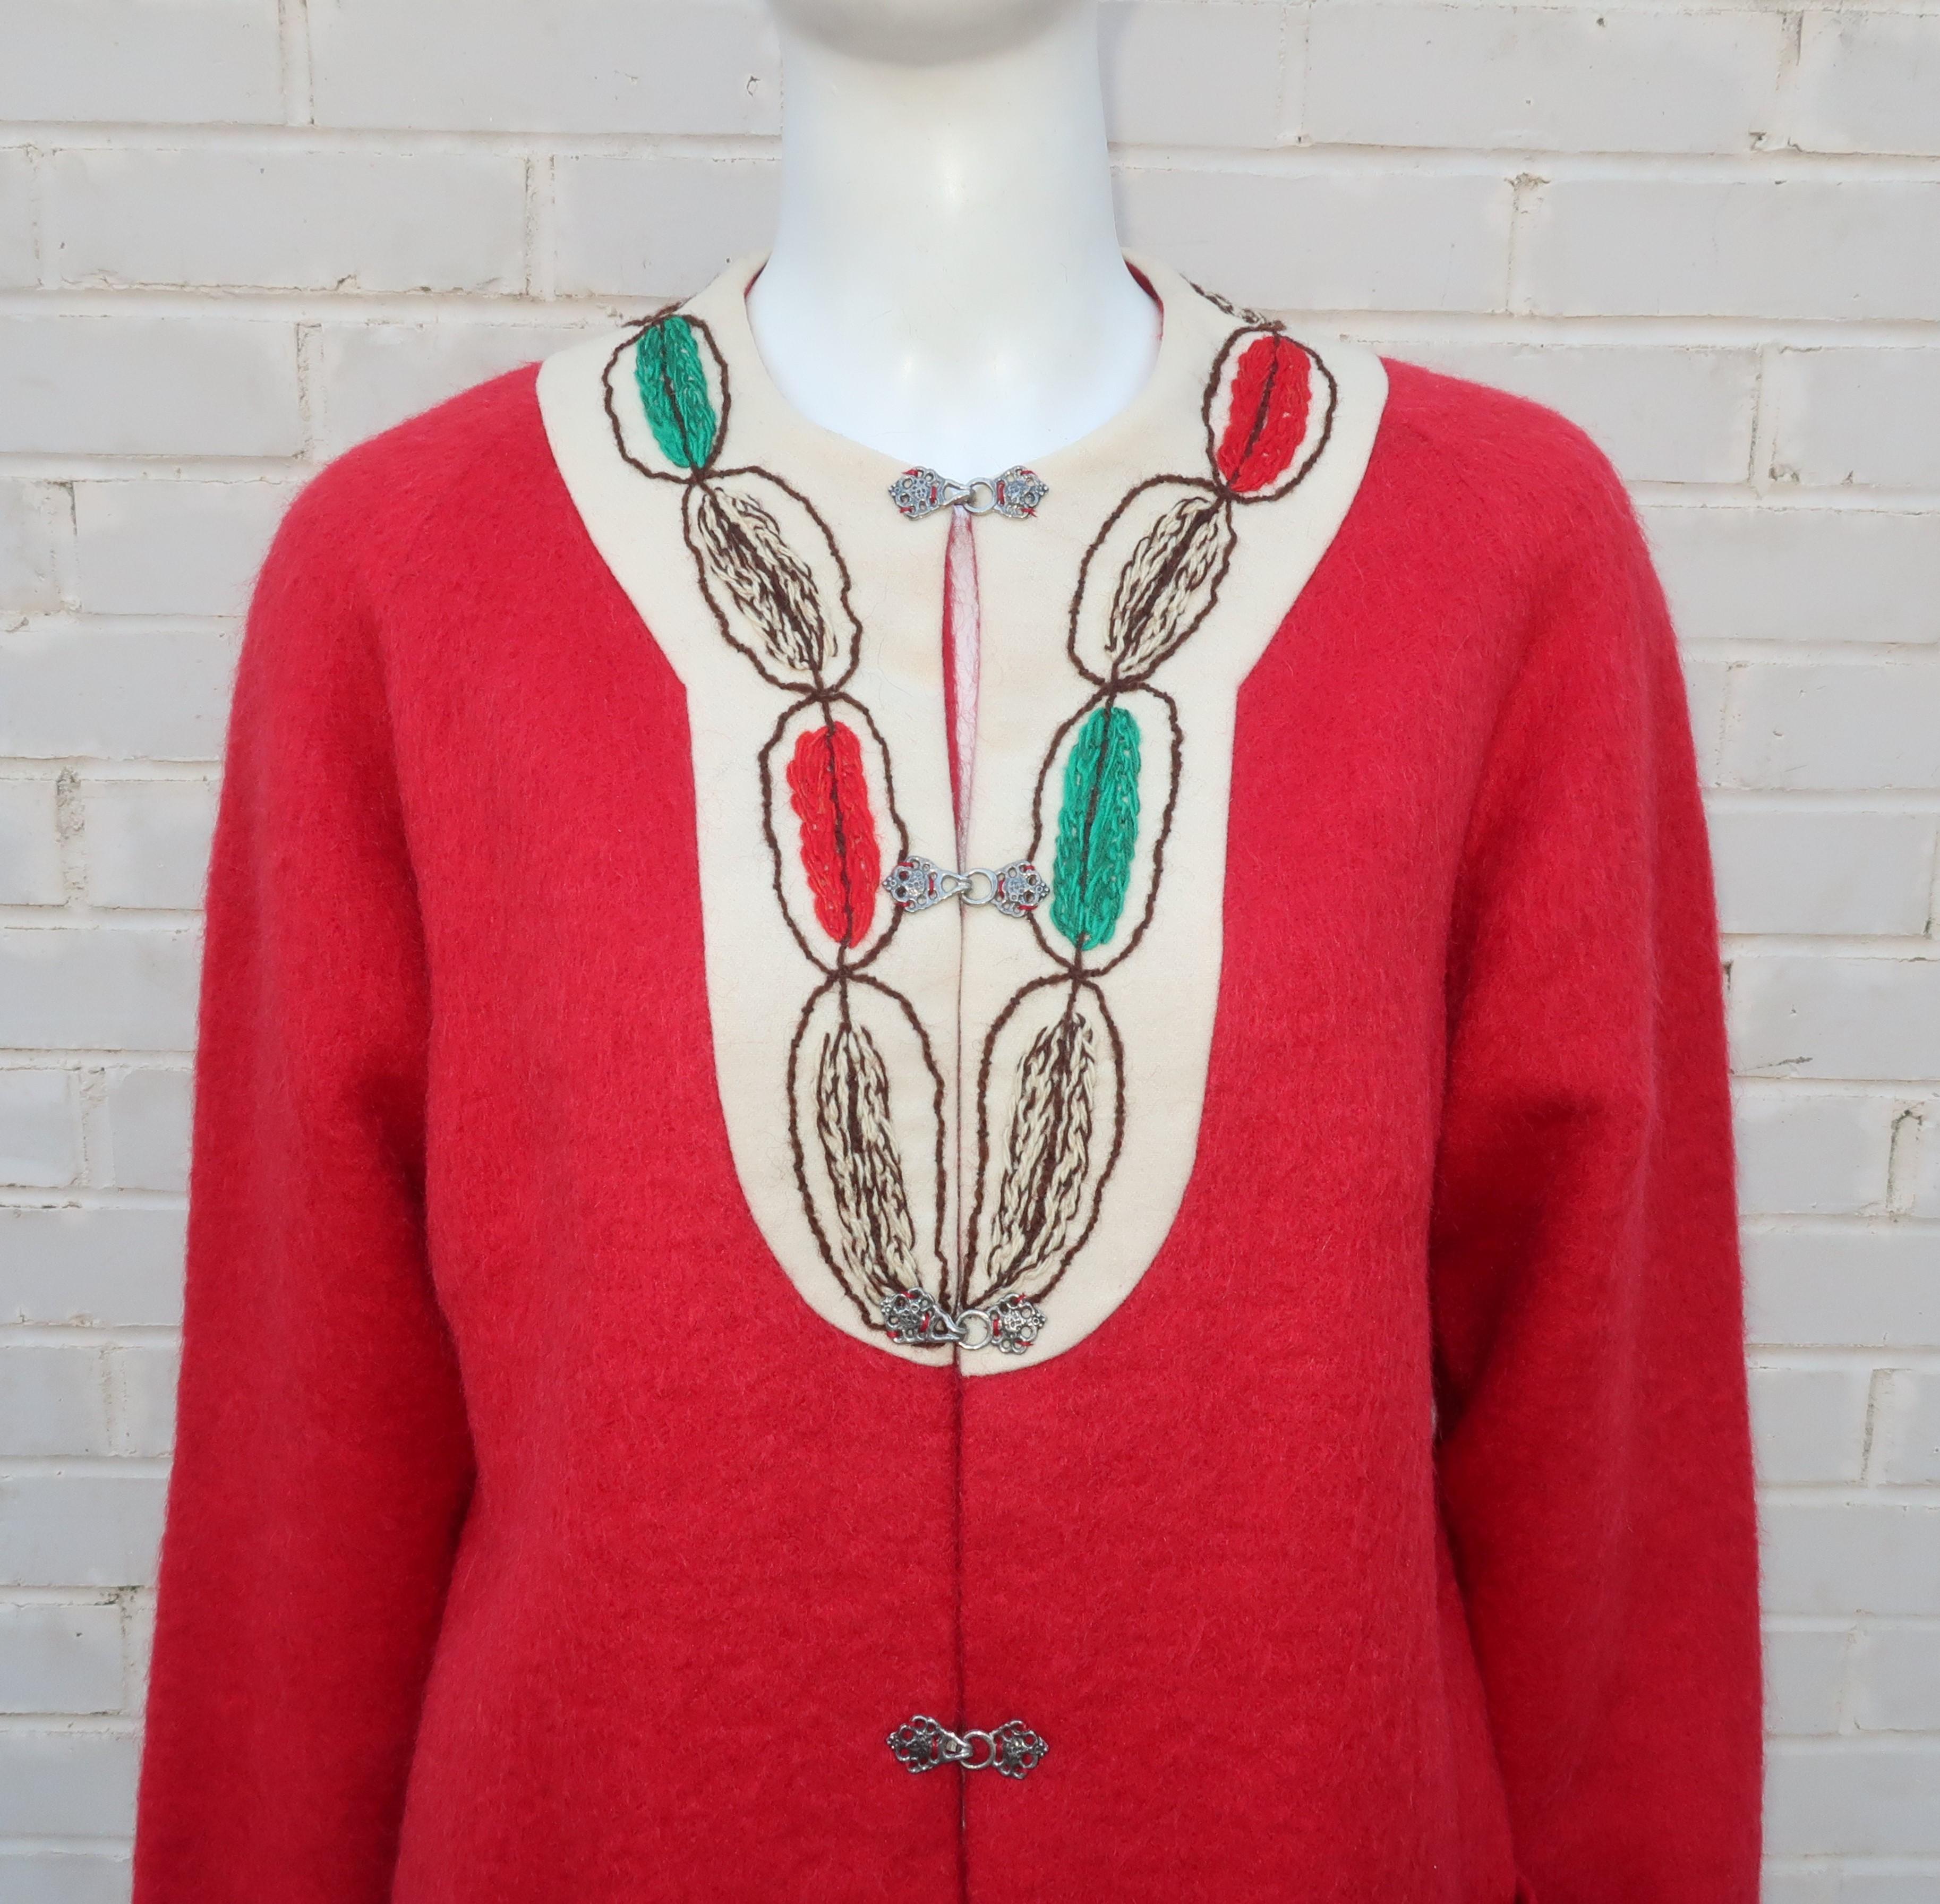 Comfy, cozy and cute!  This C.1960 Fjelstad red mohair jacket is an adorable look to pair with jeans and perfect for layering with turtlenecks or t-shirts.  The jacket features pewter frog style closures at the front, a yarn embroidered bib and